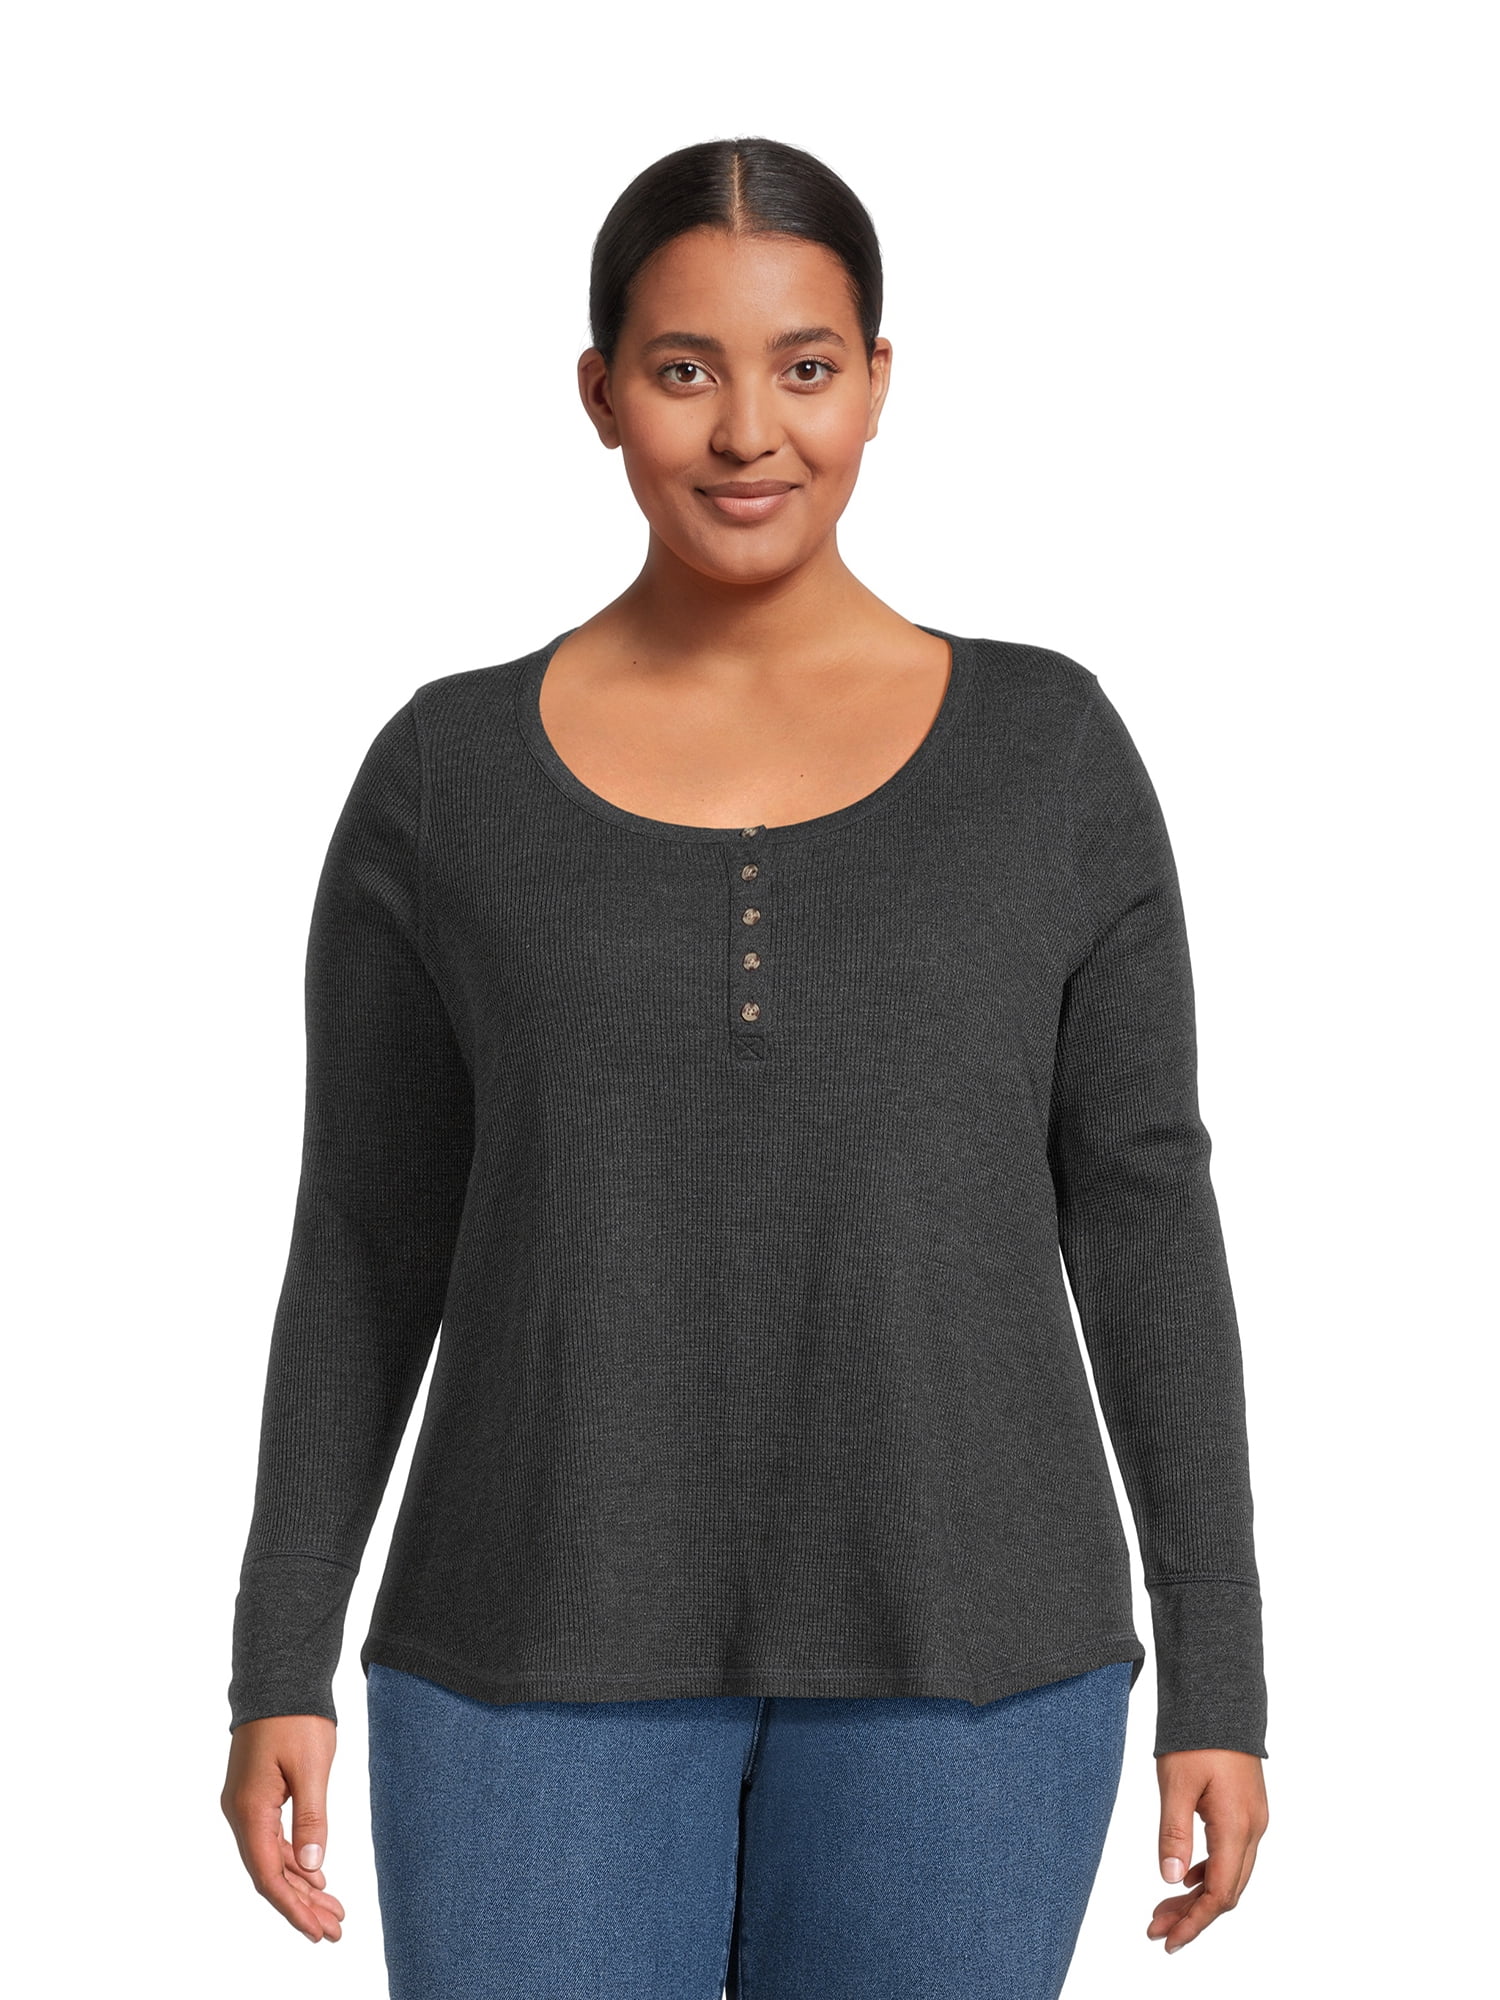 Terra & Sky Women's Plus Size Waffle Tee with Long Sleeves, Sizes 0X-4X ...